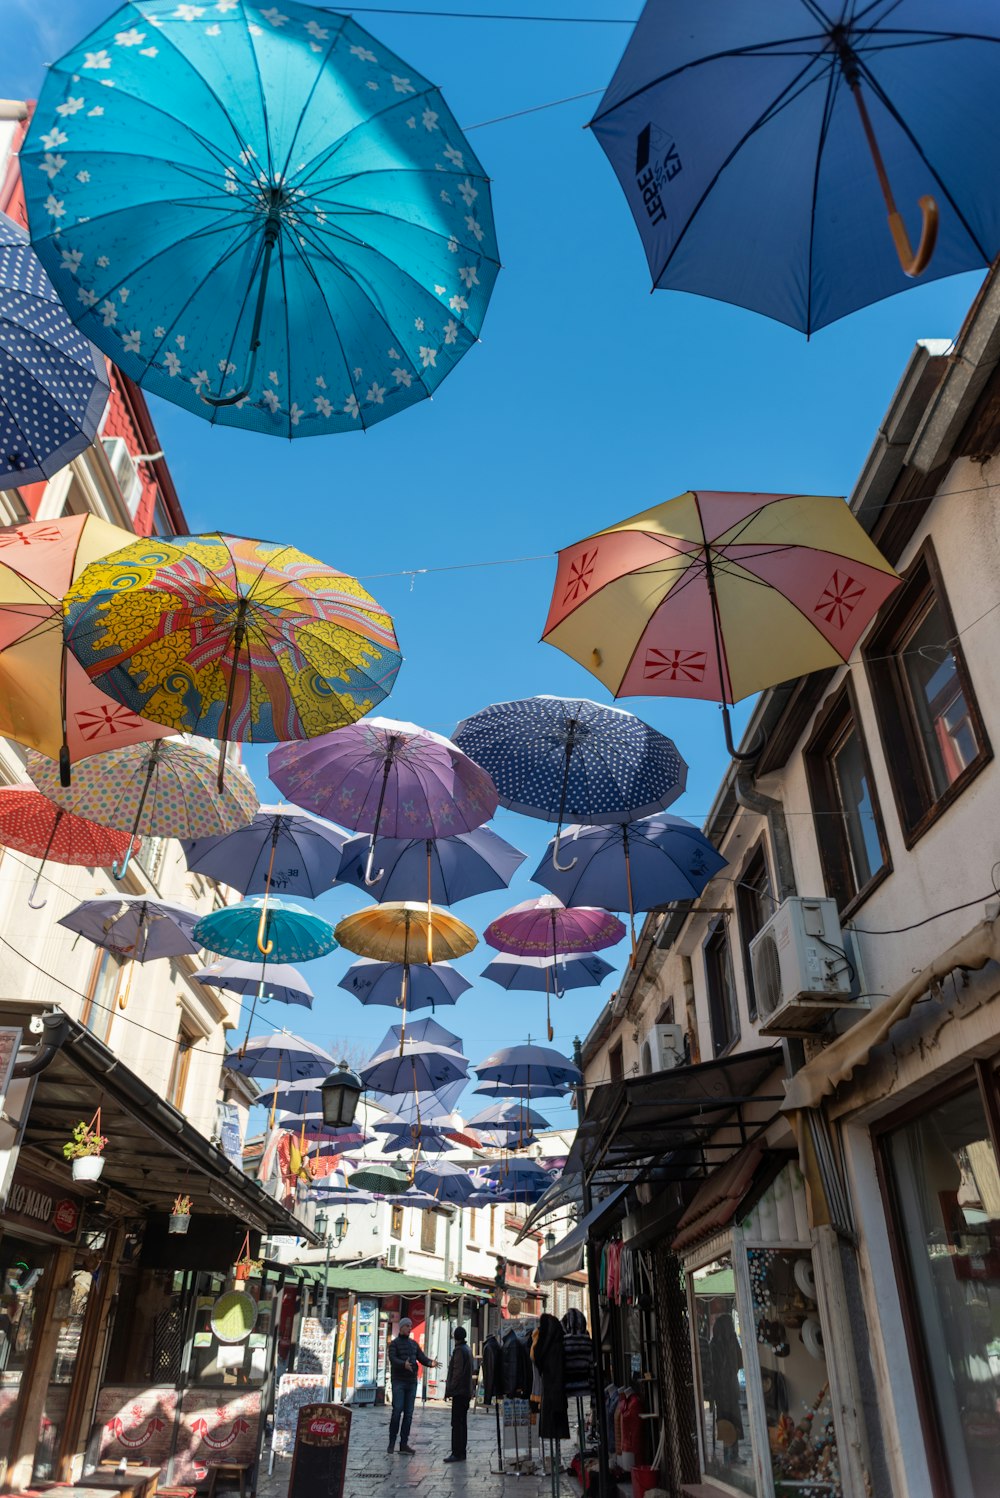 assorted umbrellas hanging on wire during daytime